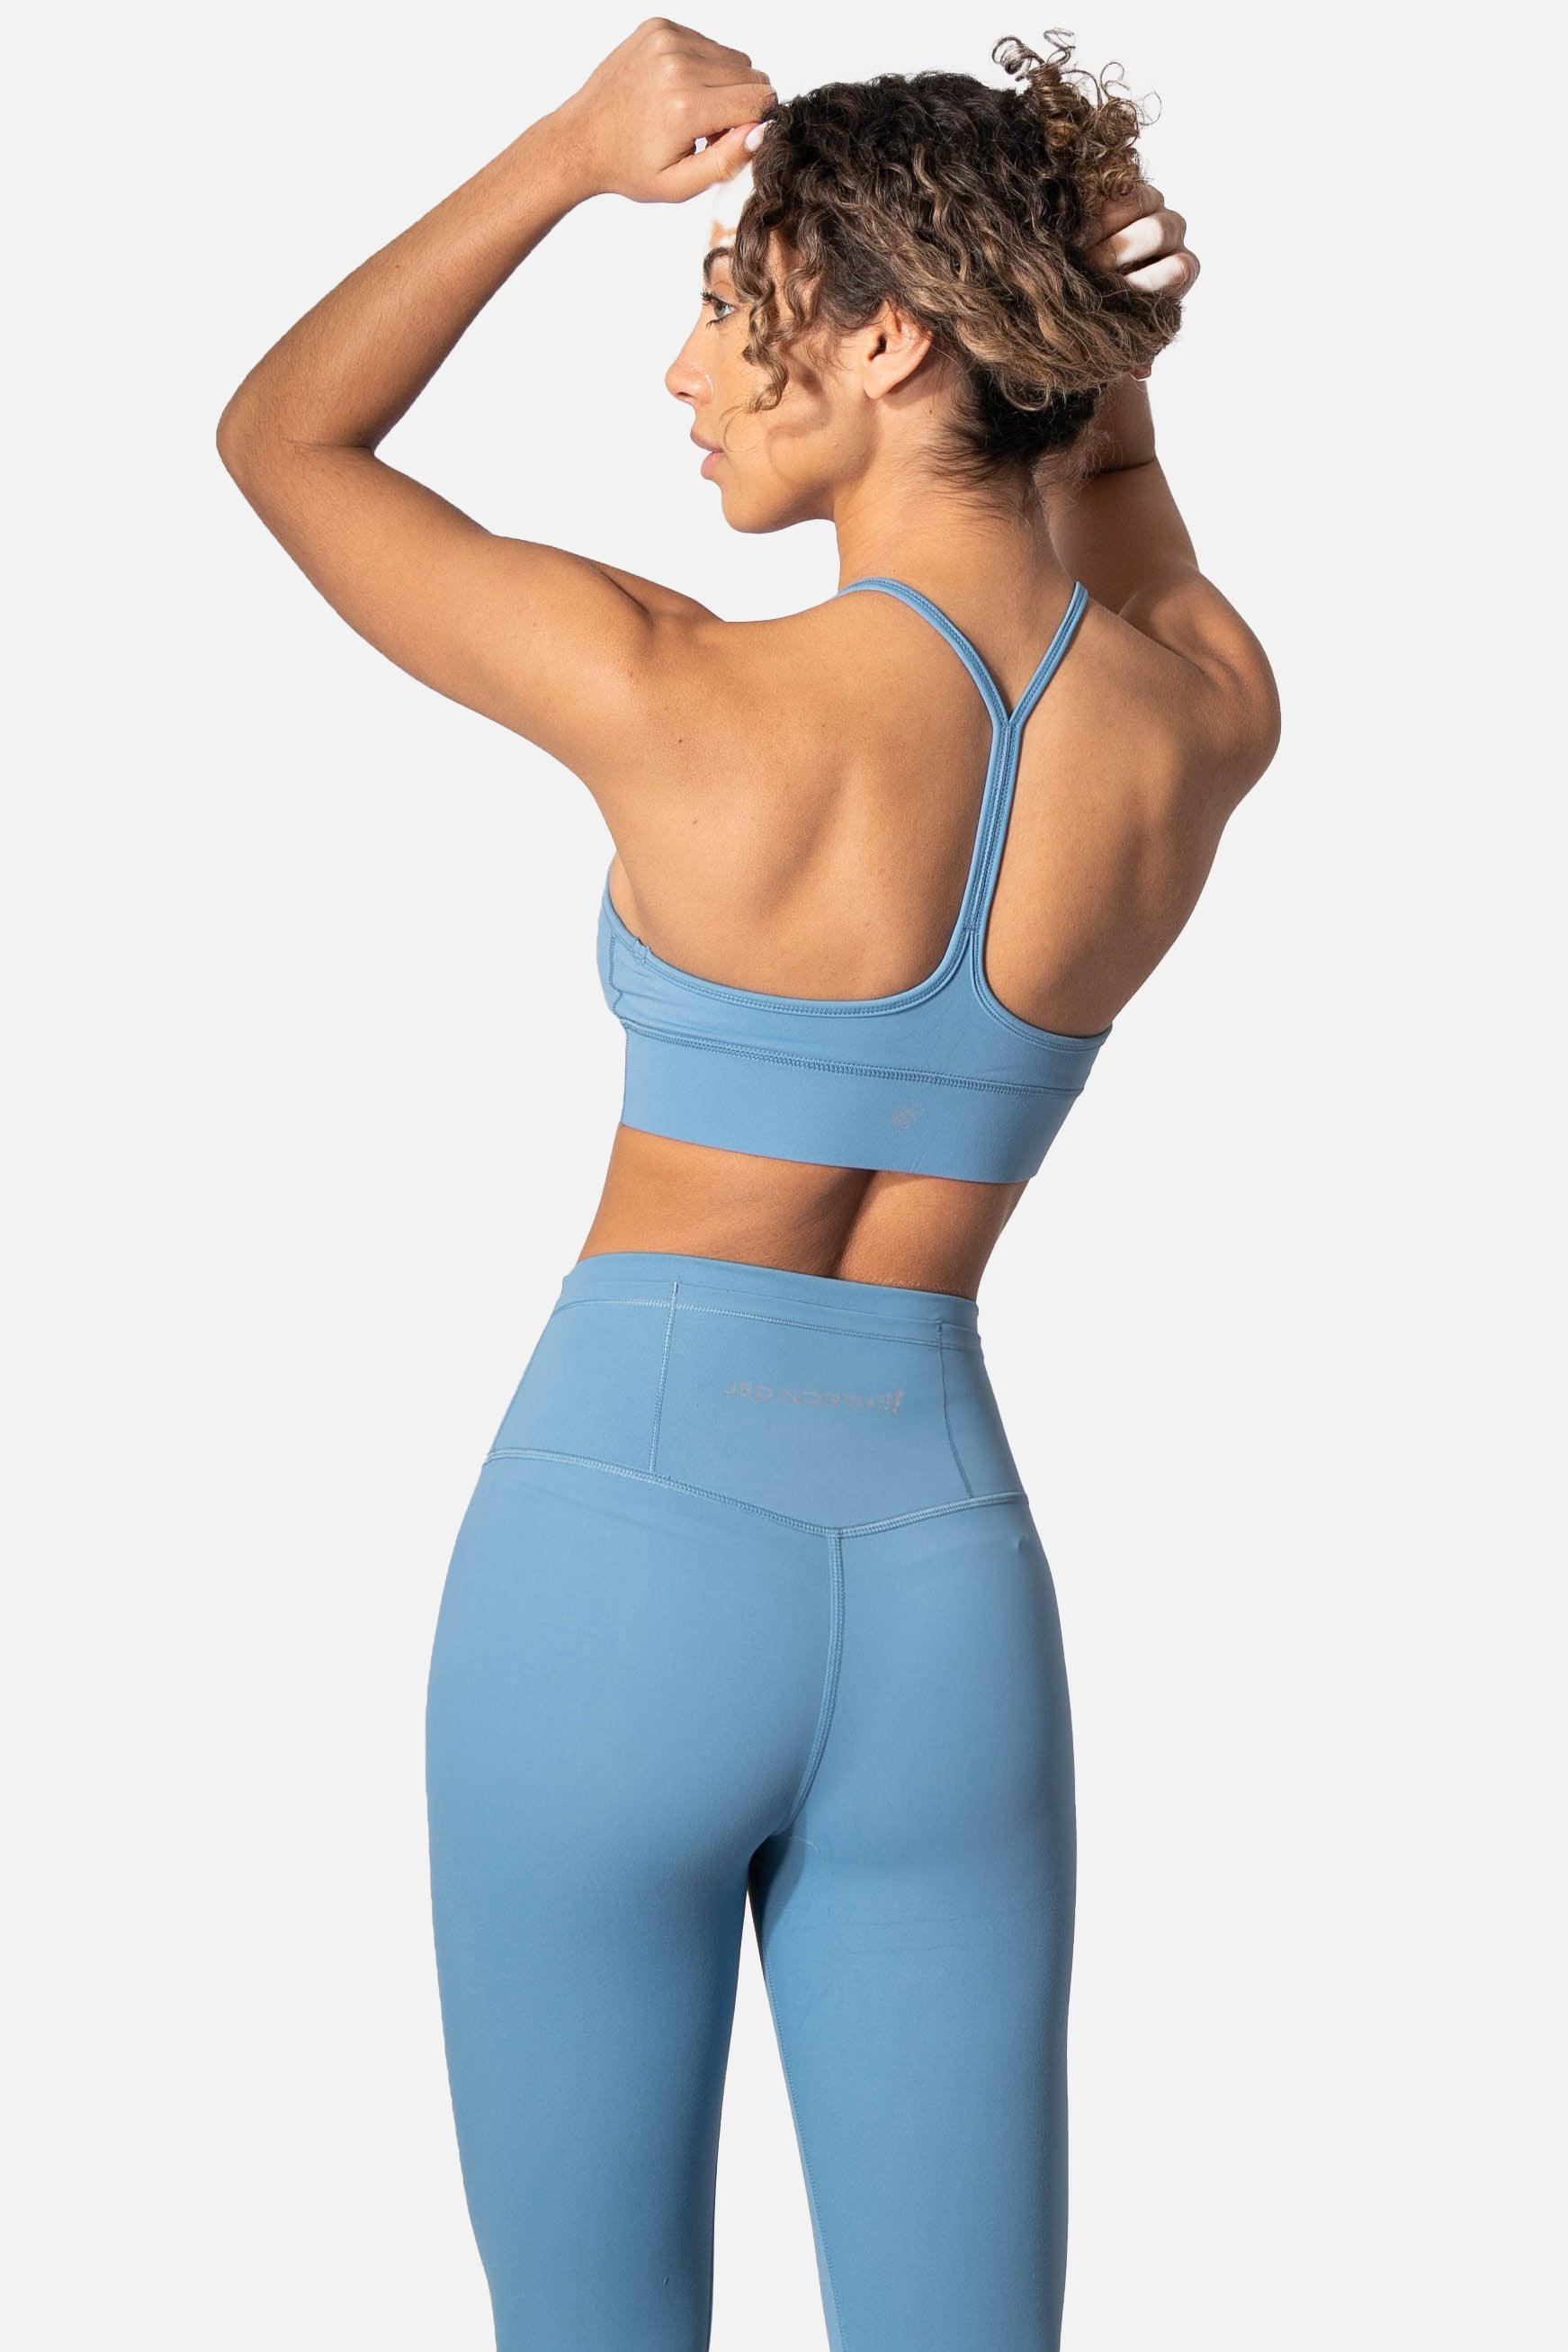 Cutouts Mesh Seamless Racerback Sports Bra From Babes & Barbells